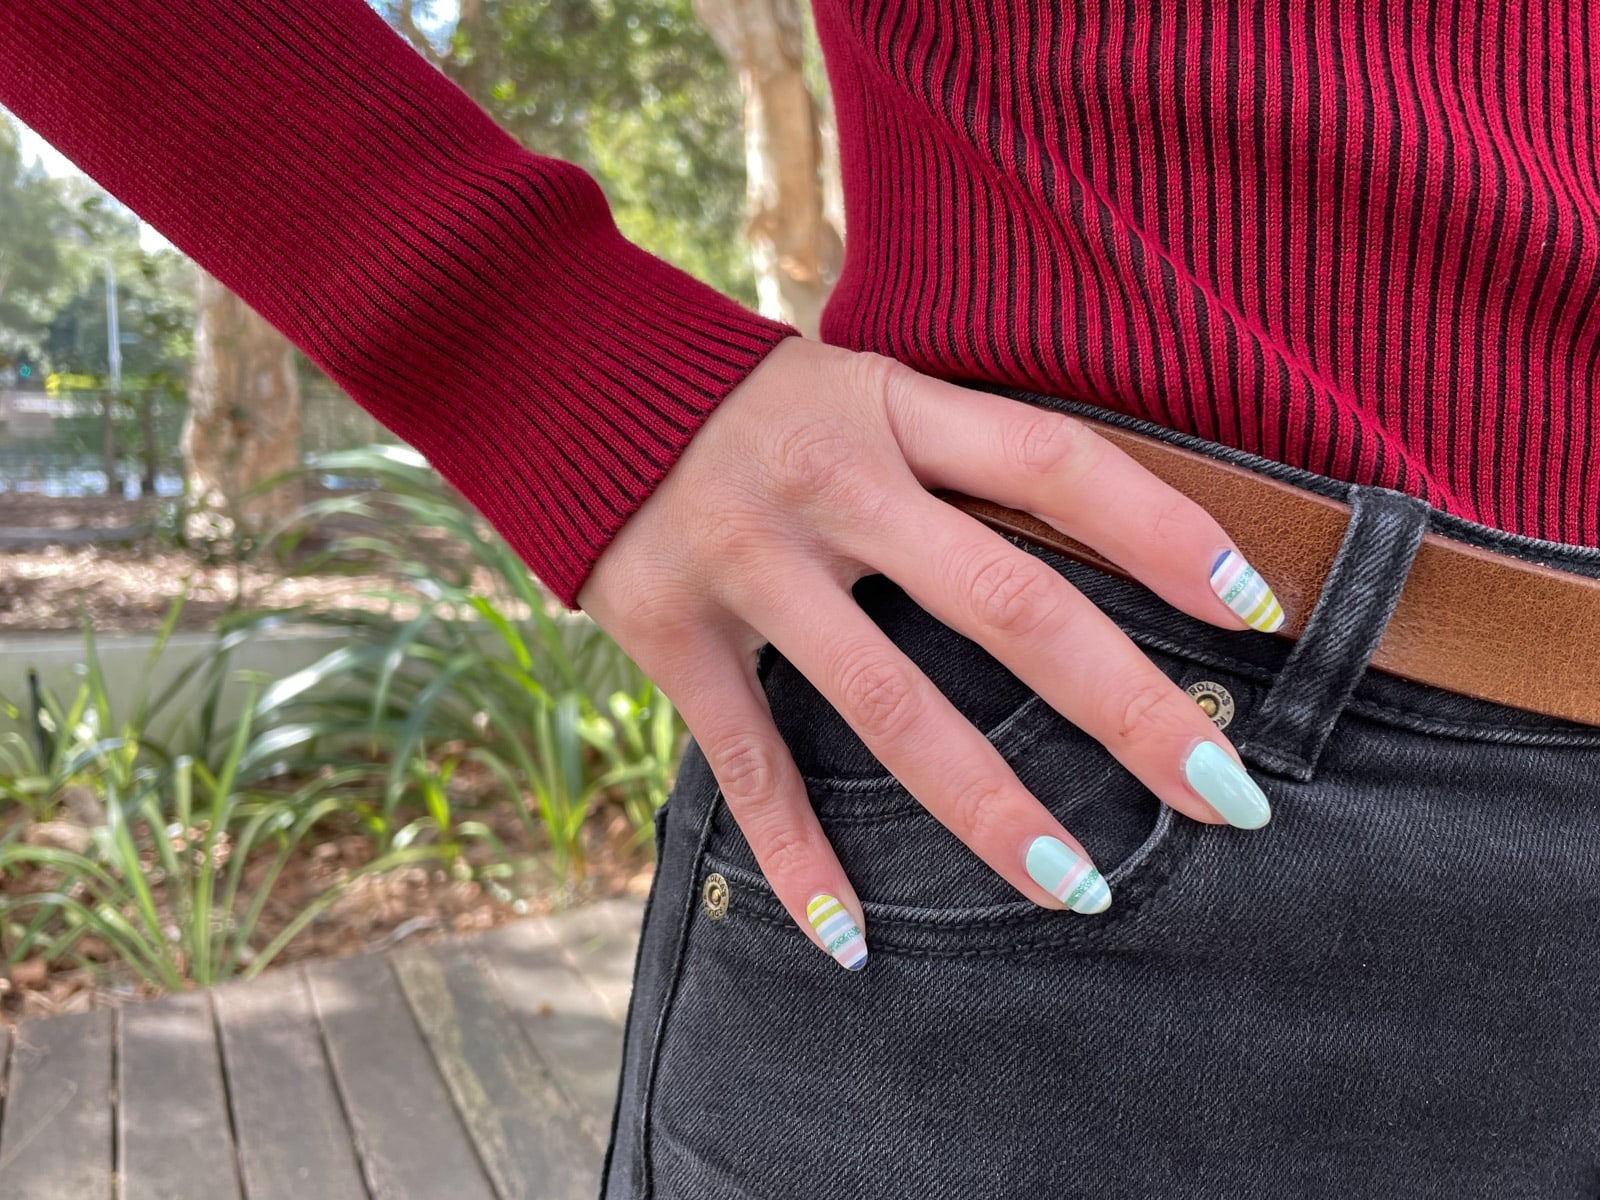 image 5: A close-up of the hand of the woman in image 1. Her hand is on her hip and her nails have multicoloured striped nail art, as well as some mint-coloured nails.